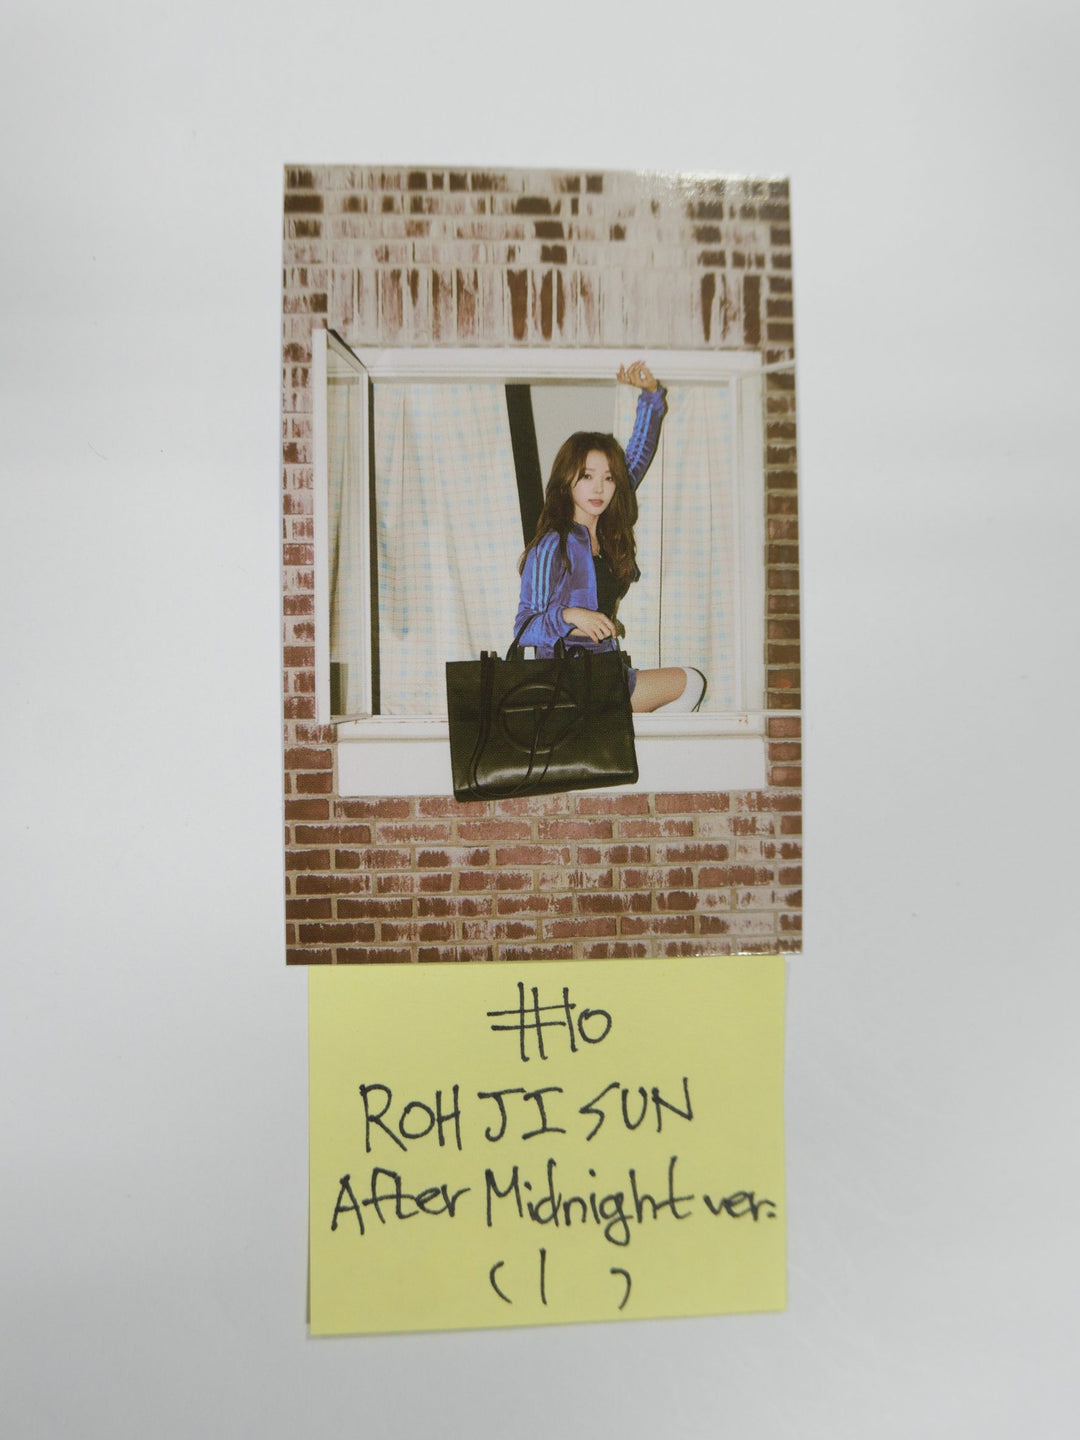 Fromis_9 "Midnight Guest" - Official Photocard [After Midnight Ver]